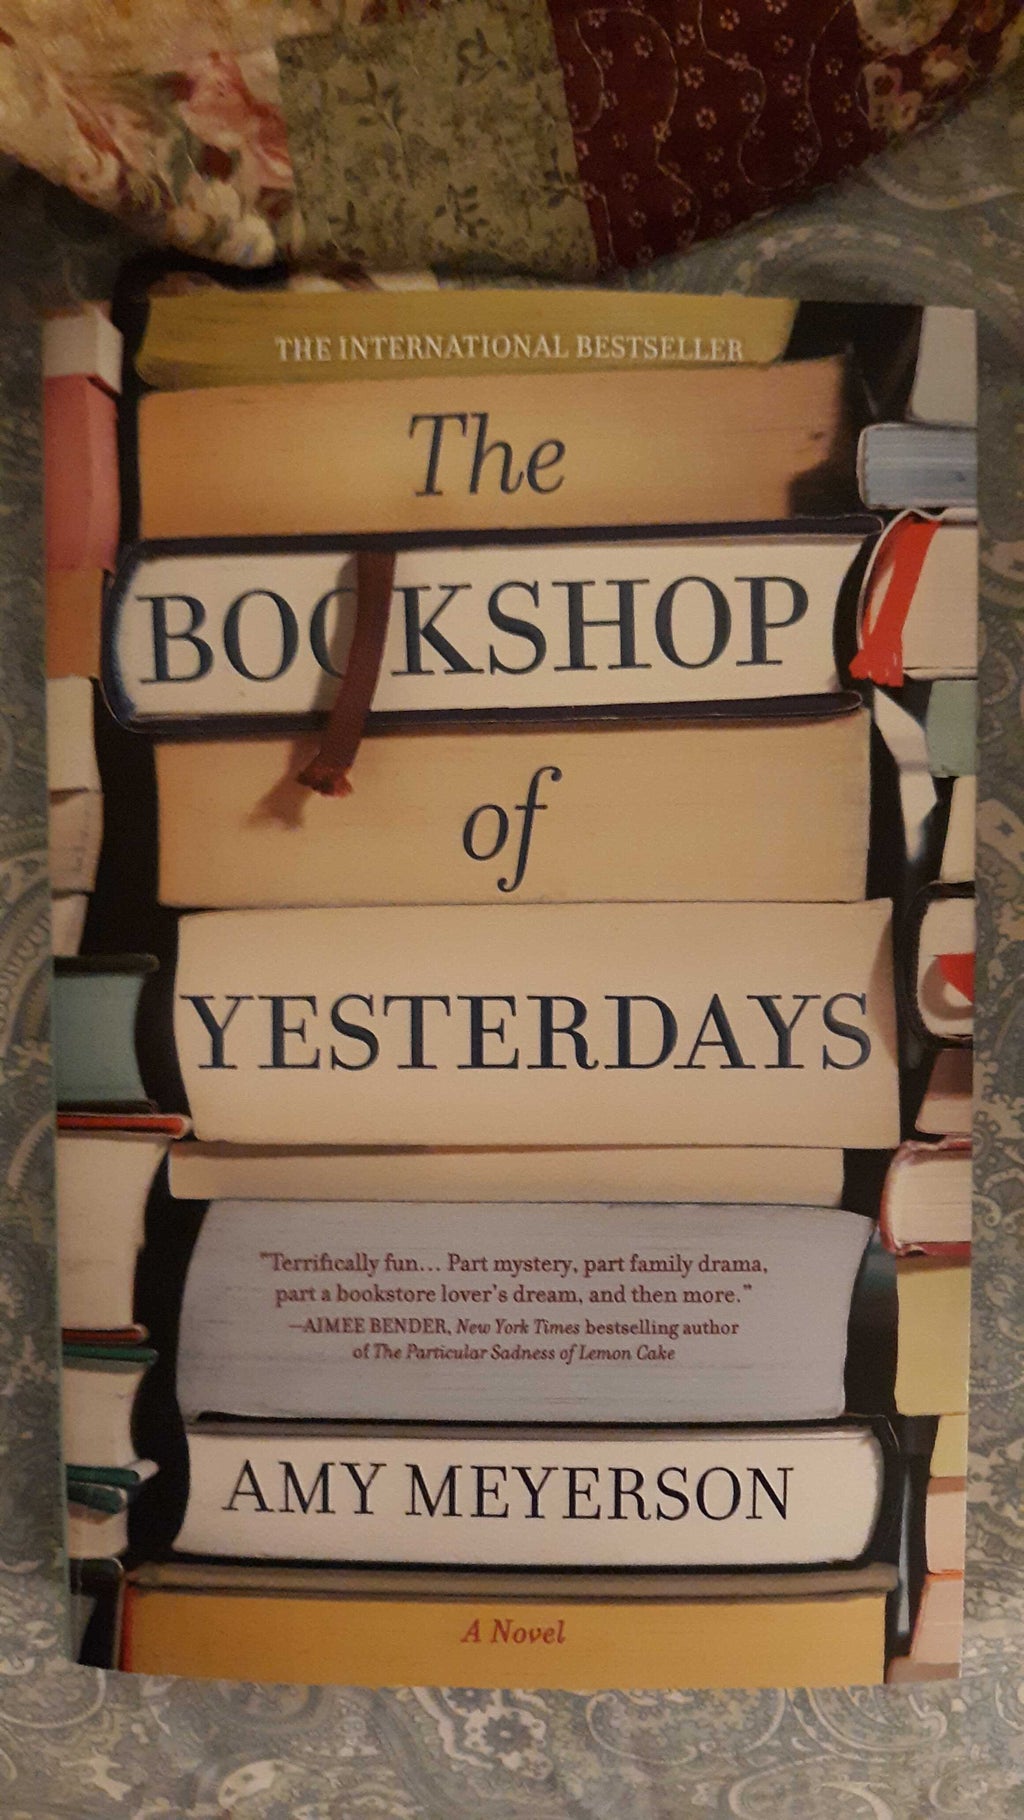 Picture I took of the cover of my personal copy of The Bookstore of Yesterdays novel